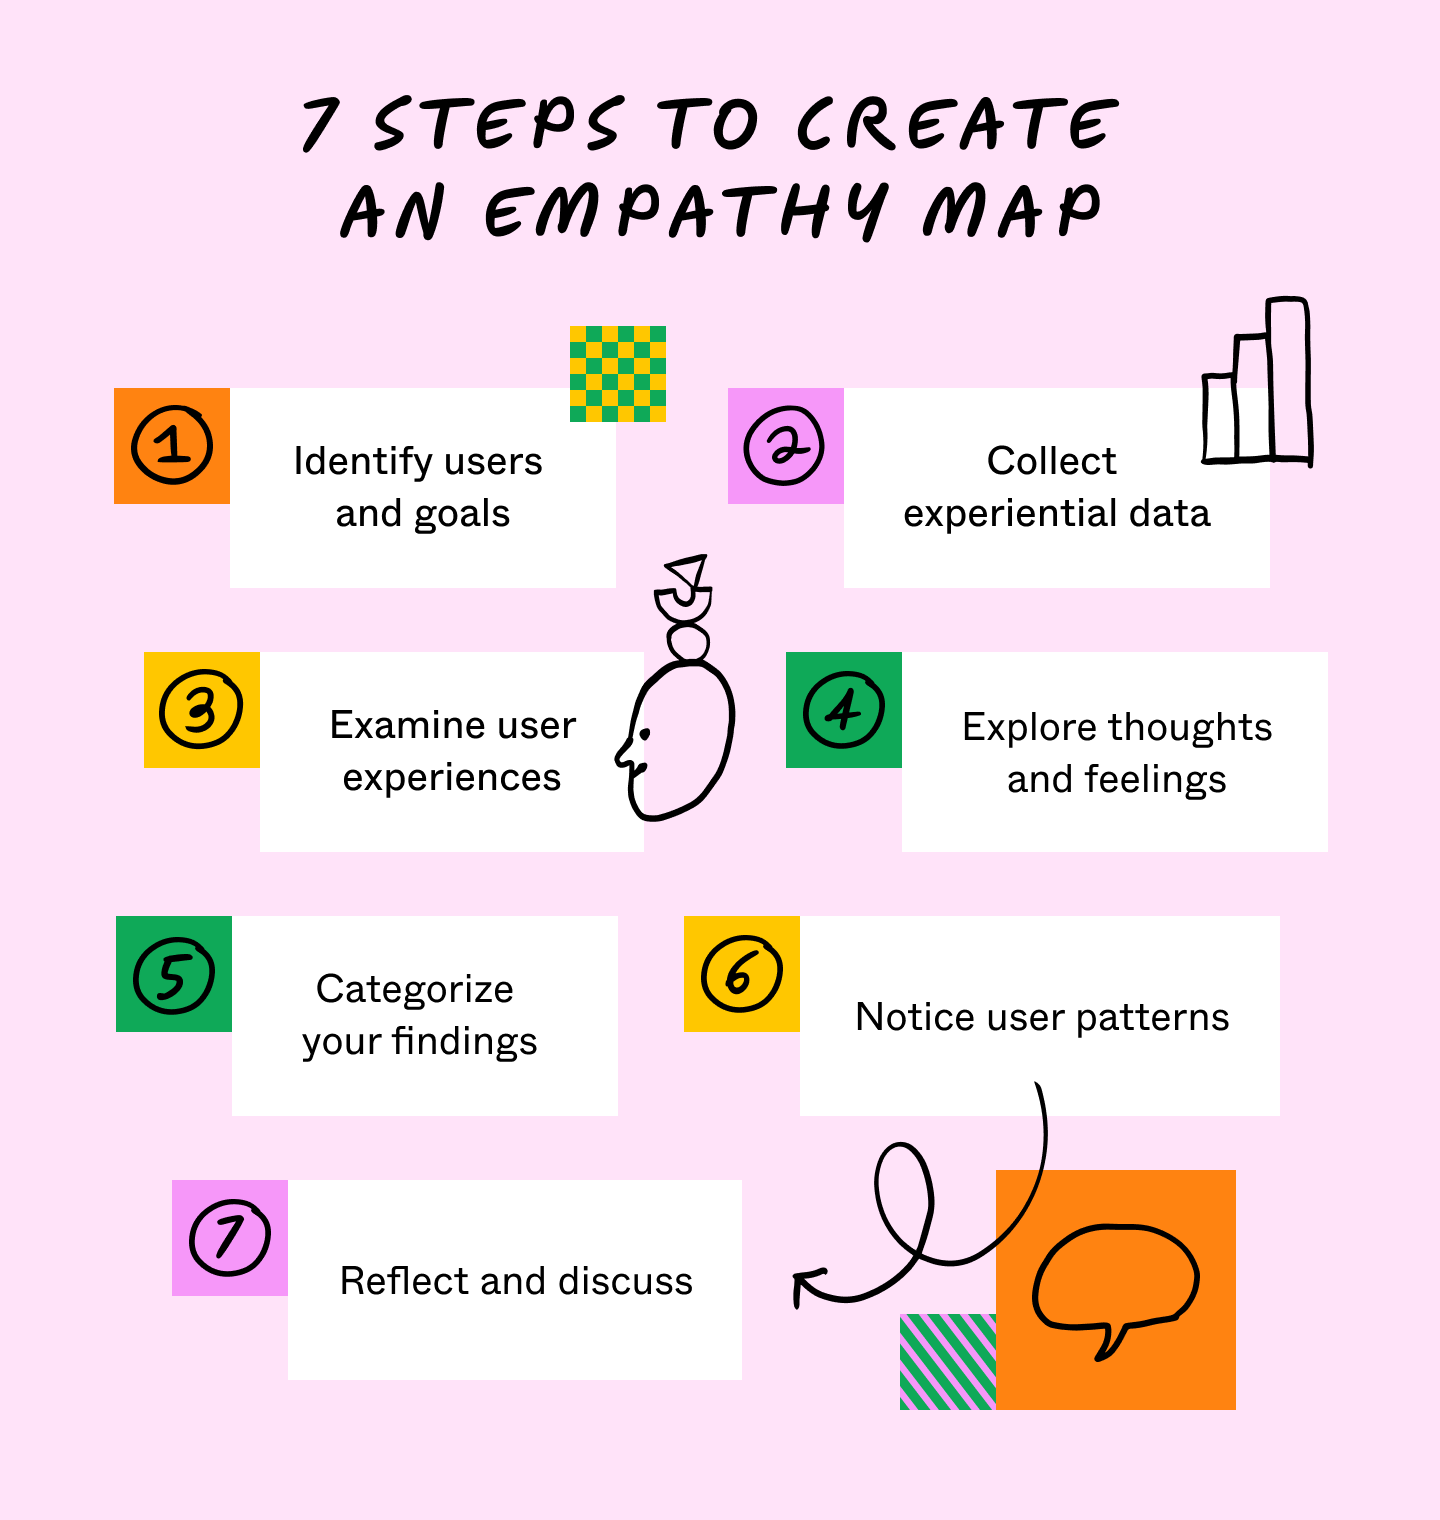 how to create an empathy map in 7 steps